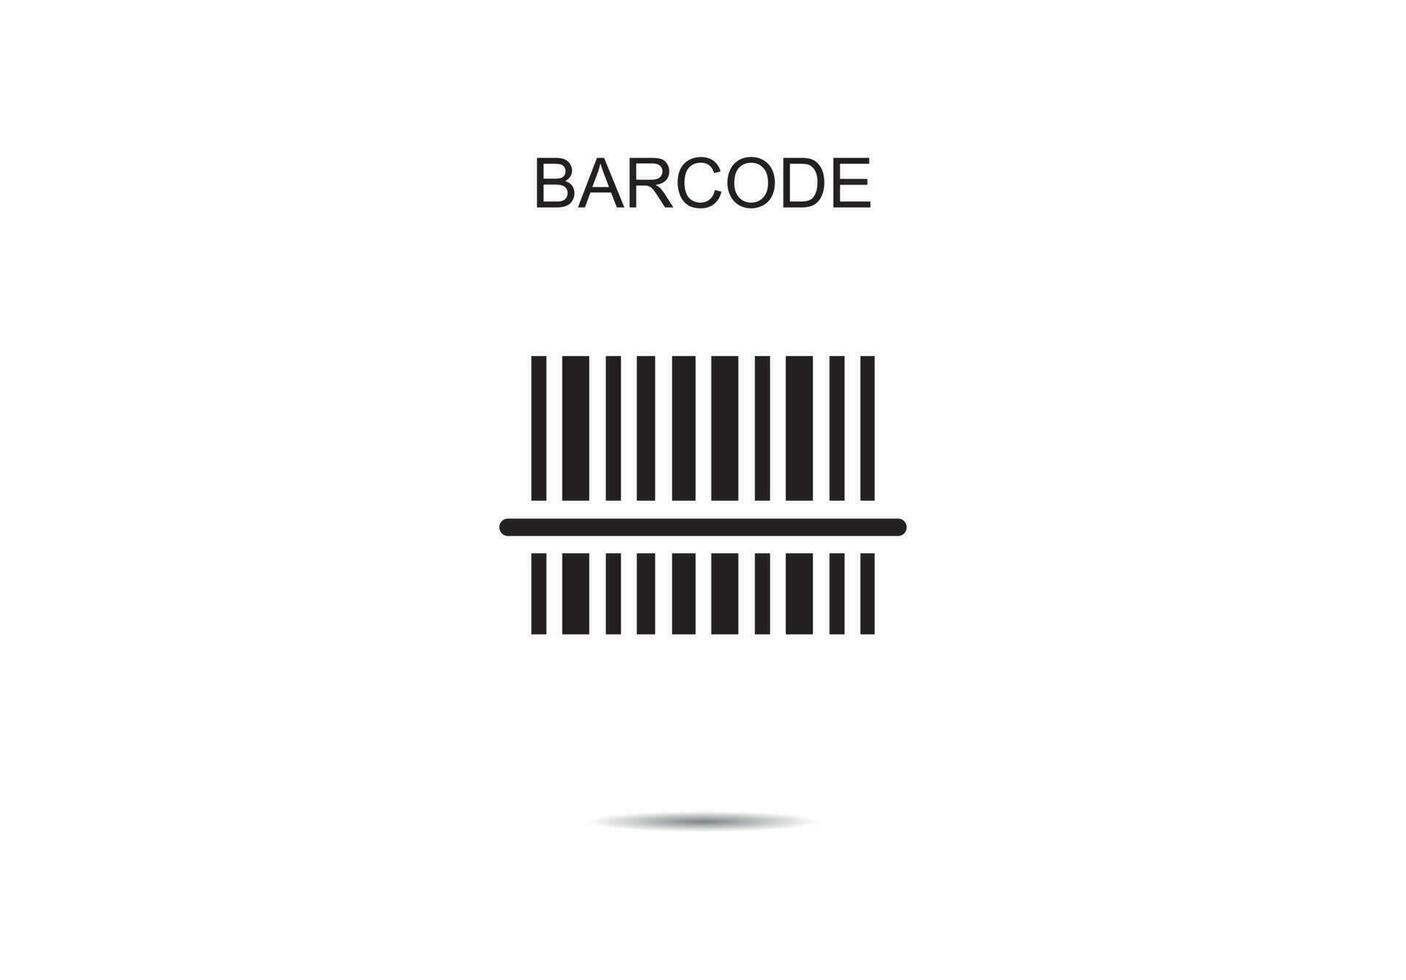 Barcode icons vector illustration on background